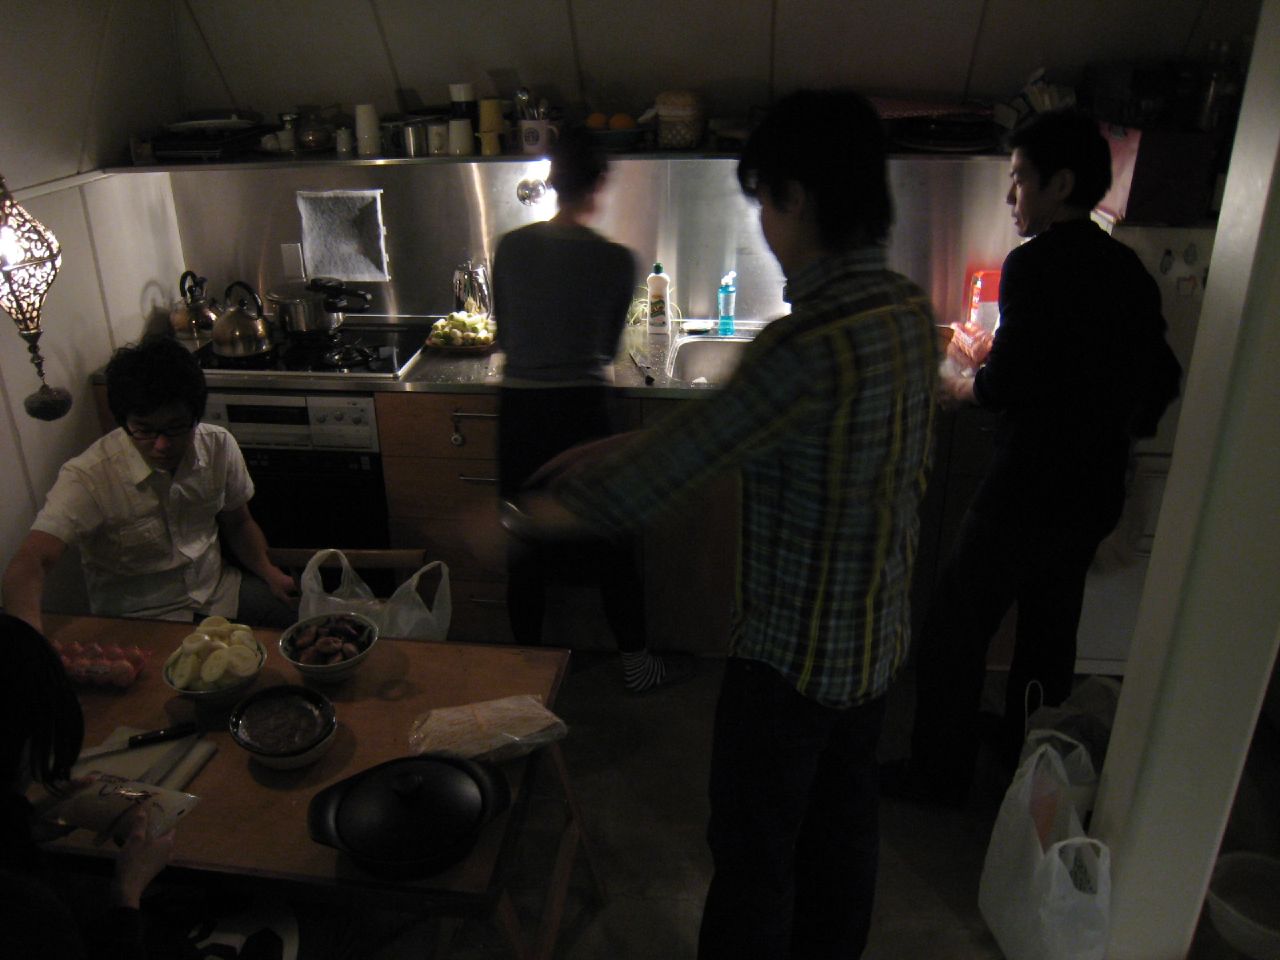 a kitchen scene with focus on a young man preparing food